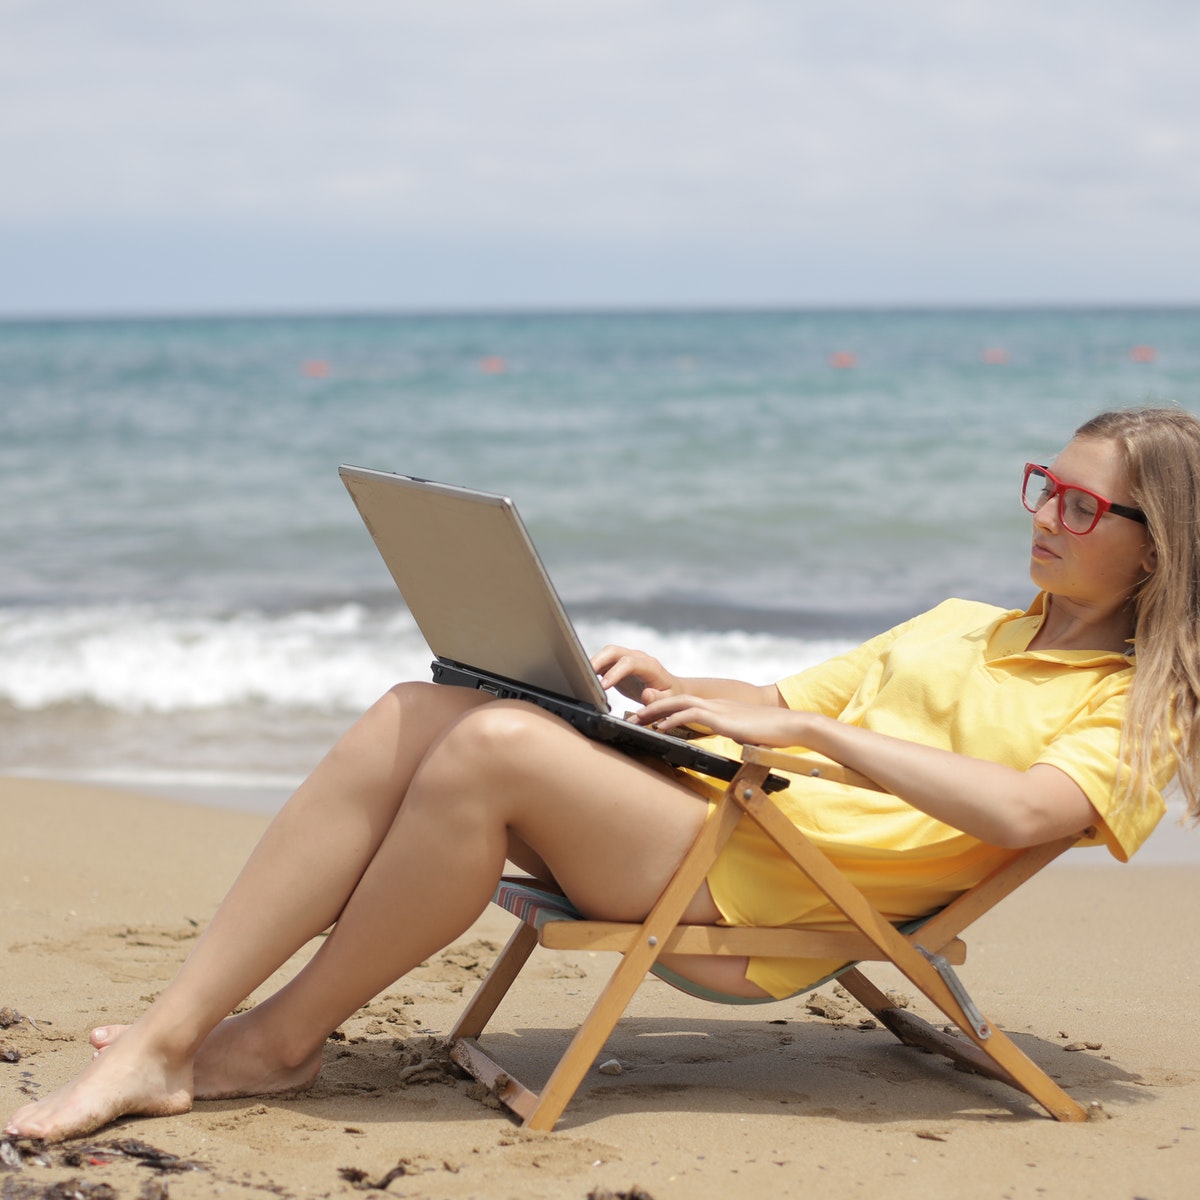 Photo by Andrea Piacquadio: https://www.pexels.com/photo/woman-in-yellow-shirt-sitting-on-brown-wooden-folding-chair-on-beach-3785612/, travel